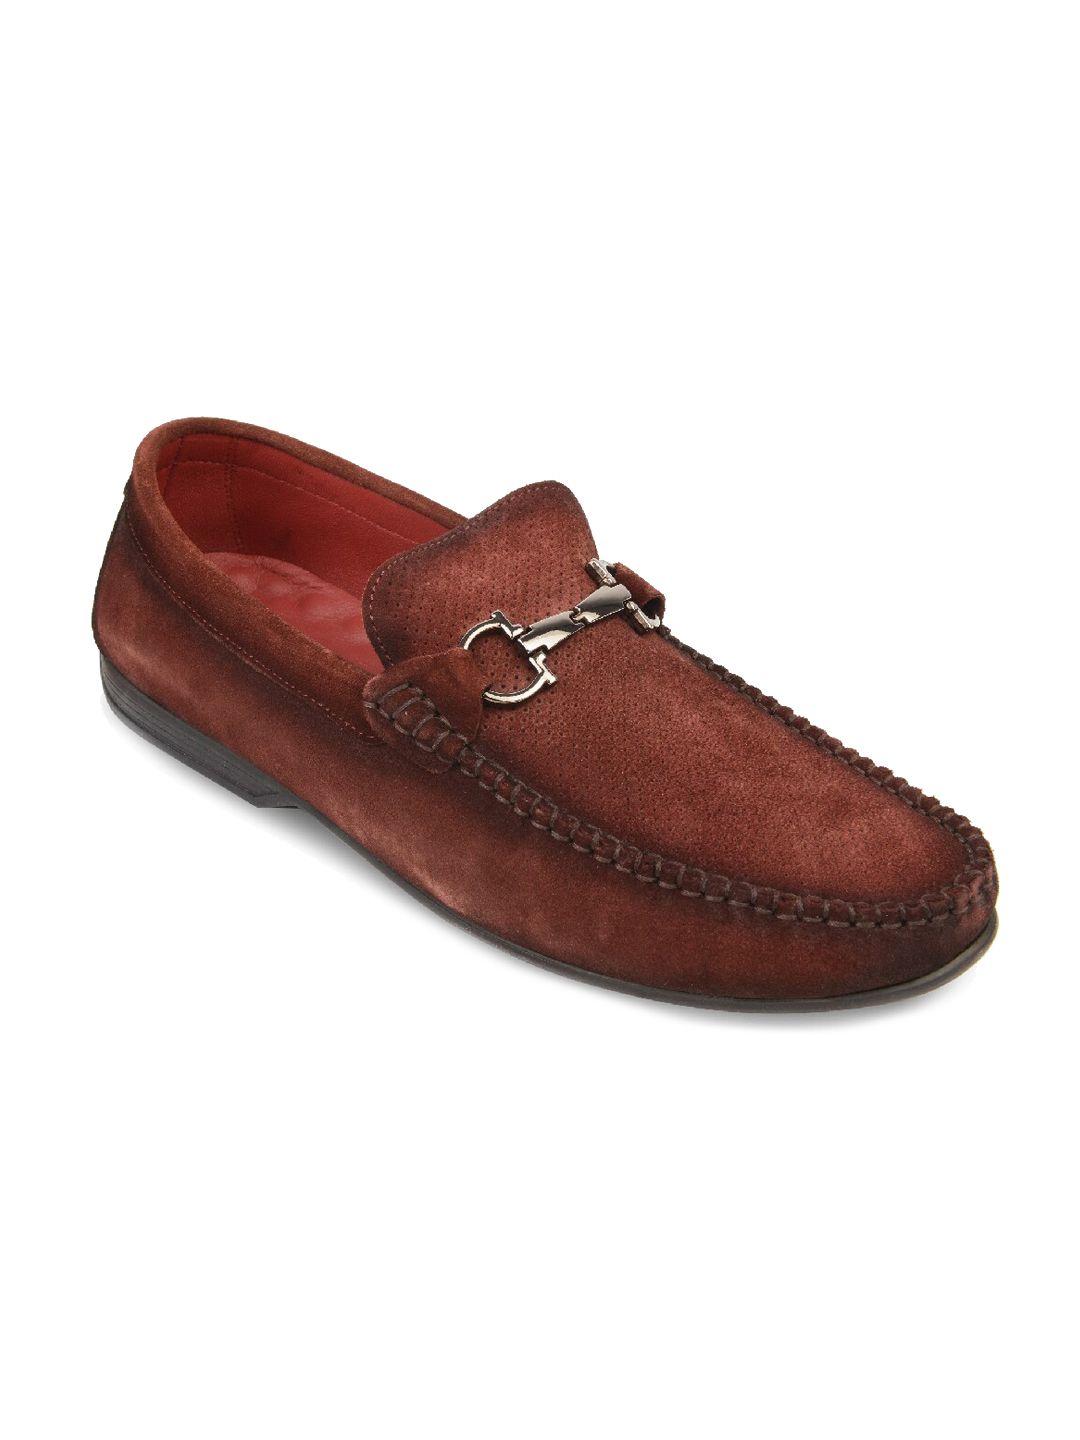 regal-men-maroon-textured-leather-loafers